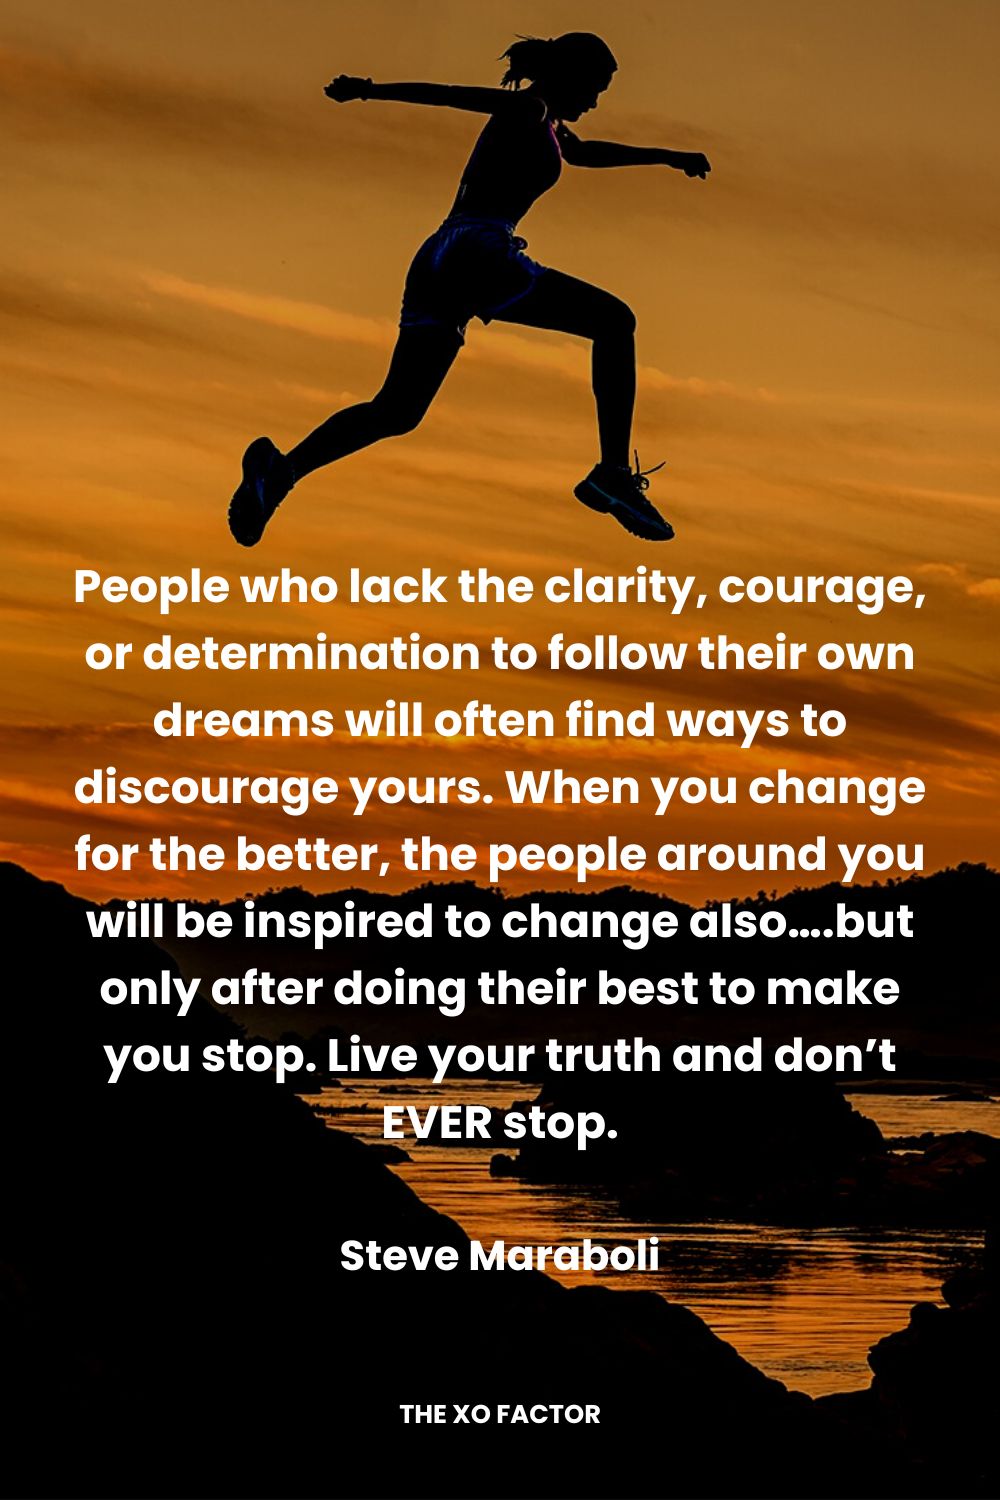 People who lack the clarity, courage, or determination to follow their own dreams will often find ways to discourage yours. When you change for the better, the people around you will be inspired to change also….but only after doing their best to make you stop. Live your truth and don’t EVER stop. Steve Maraboli